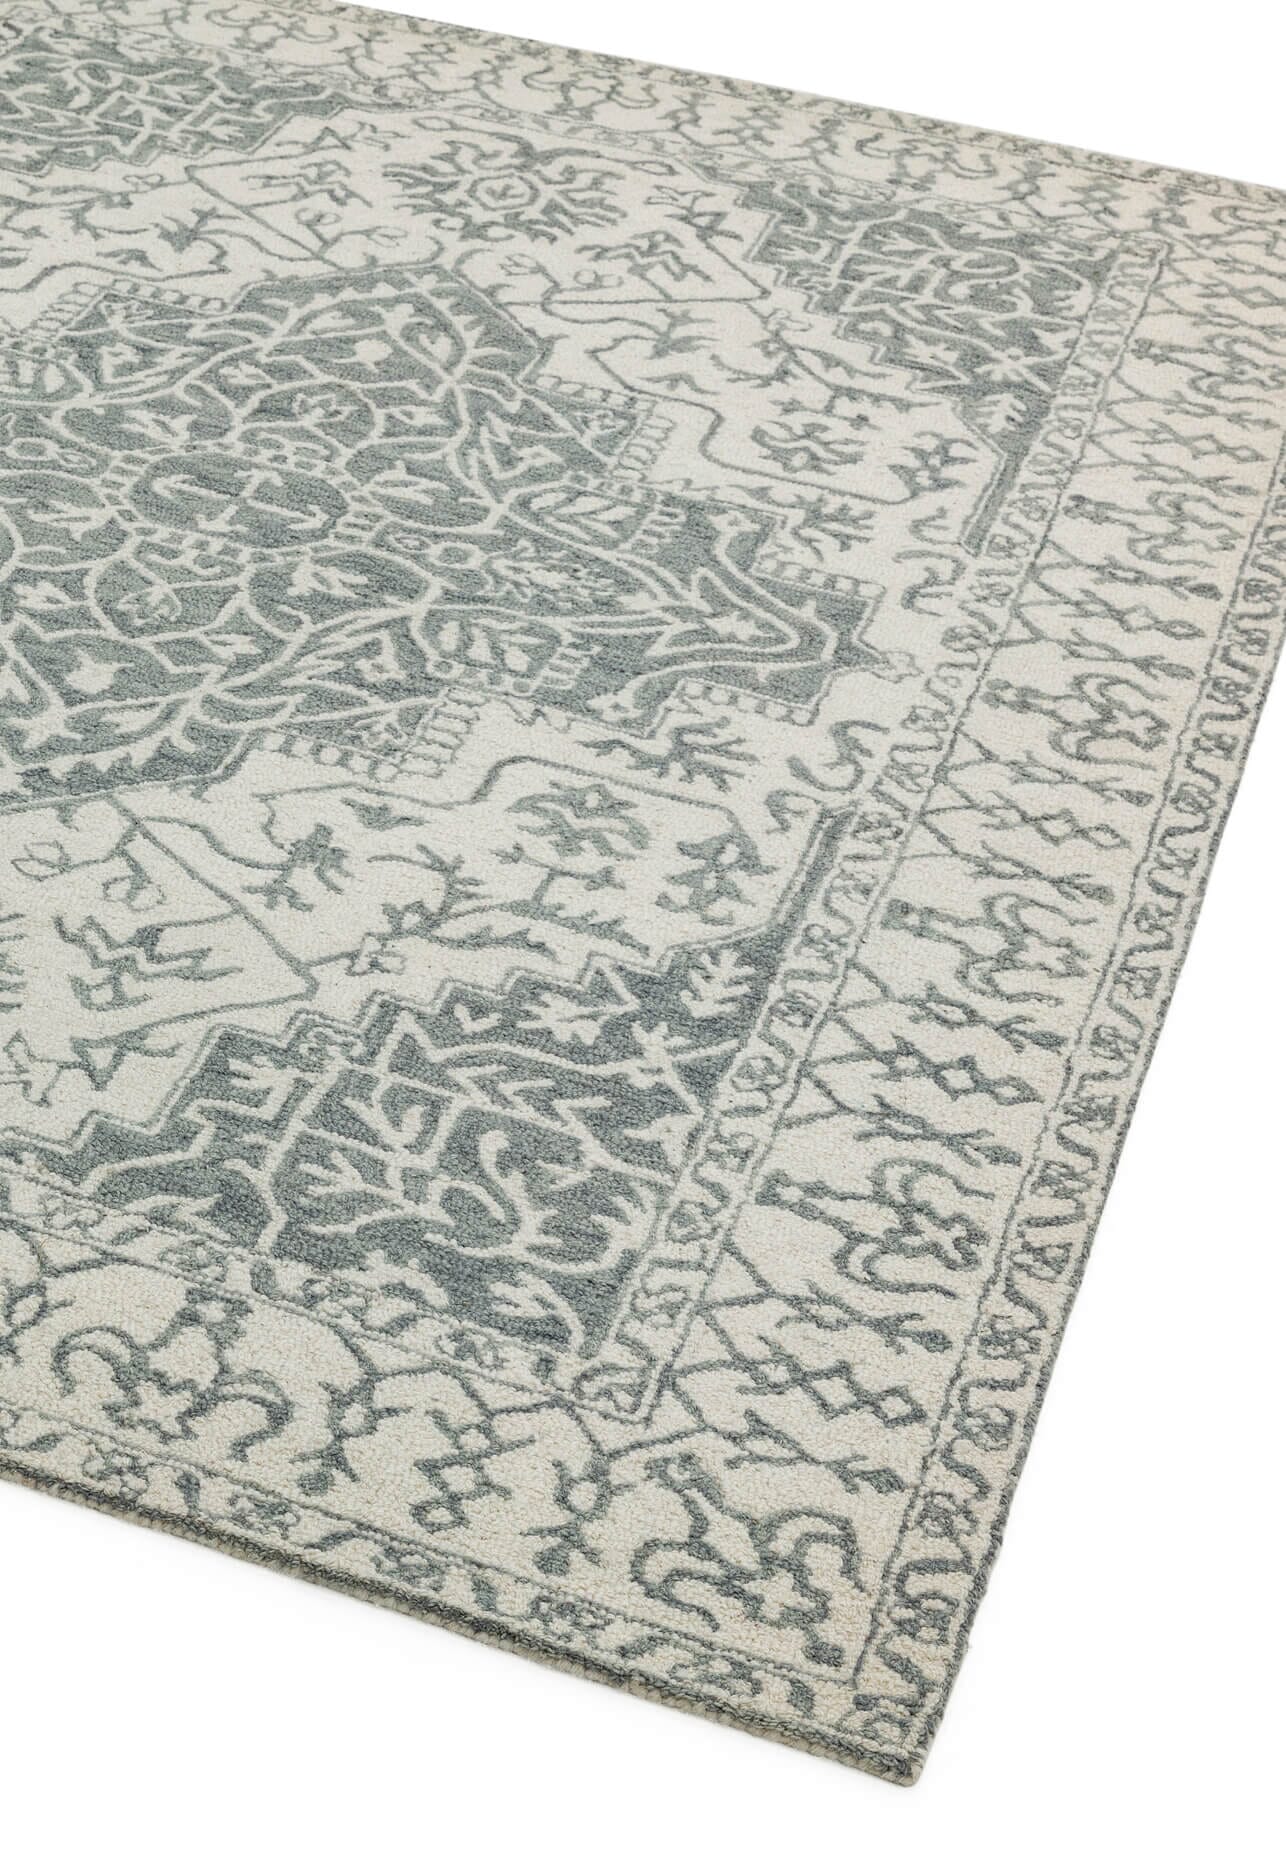  Asiatic Carpets-Asiatic Carpets Bronte Fine Loop Hand Tufted Rug Silver Grey - 160 x 230cm-Beige, Natural 941 